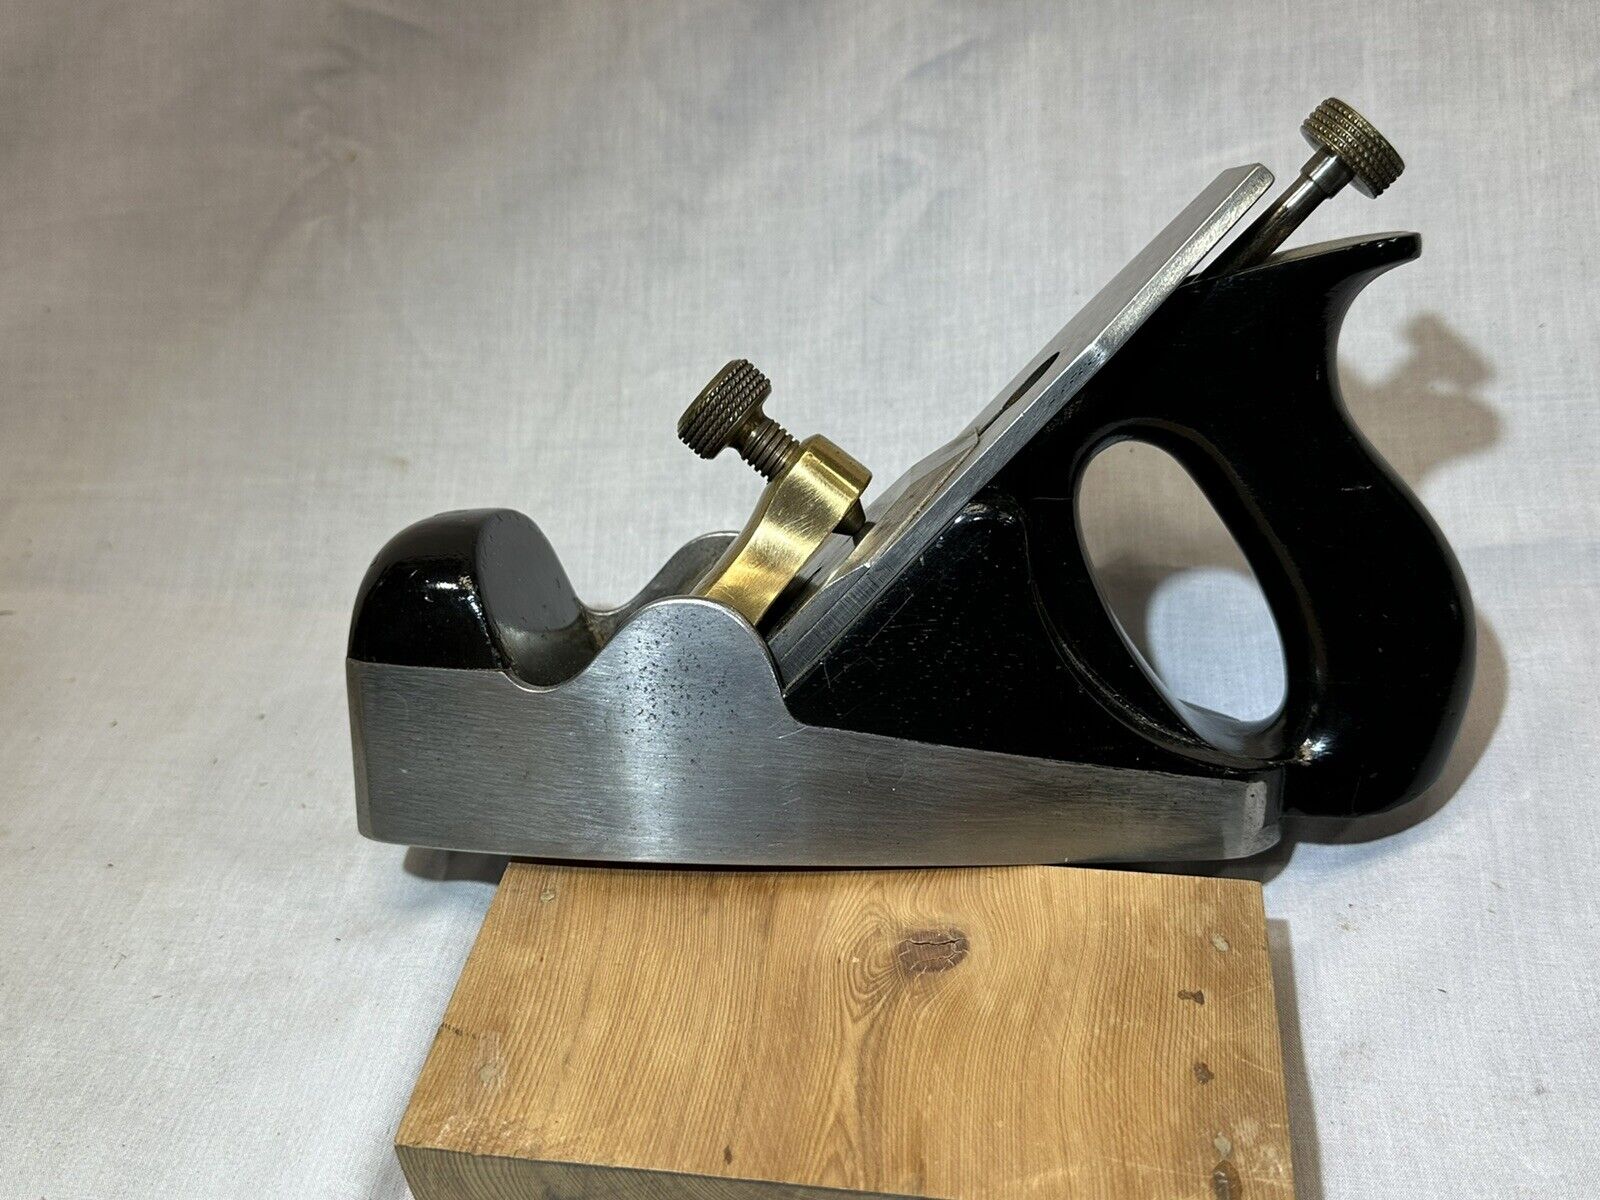 Norris of London A5 Smoothing Plane